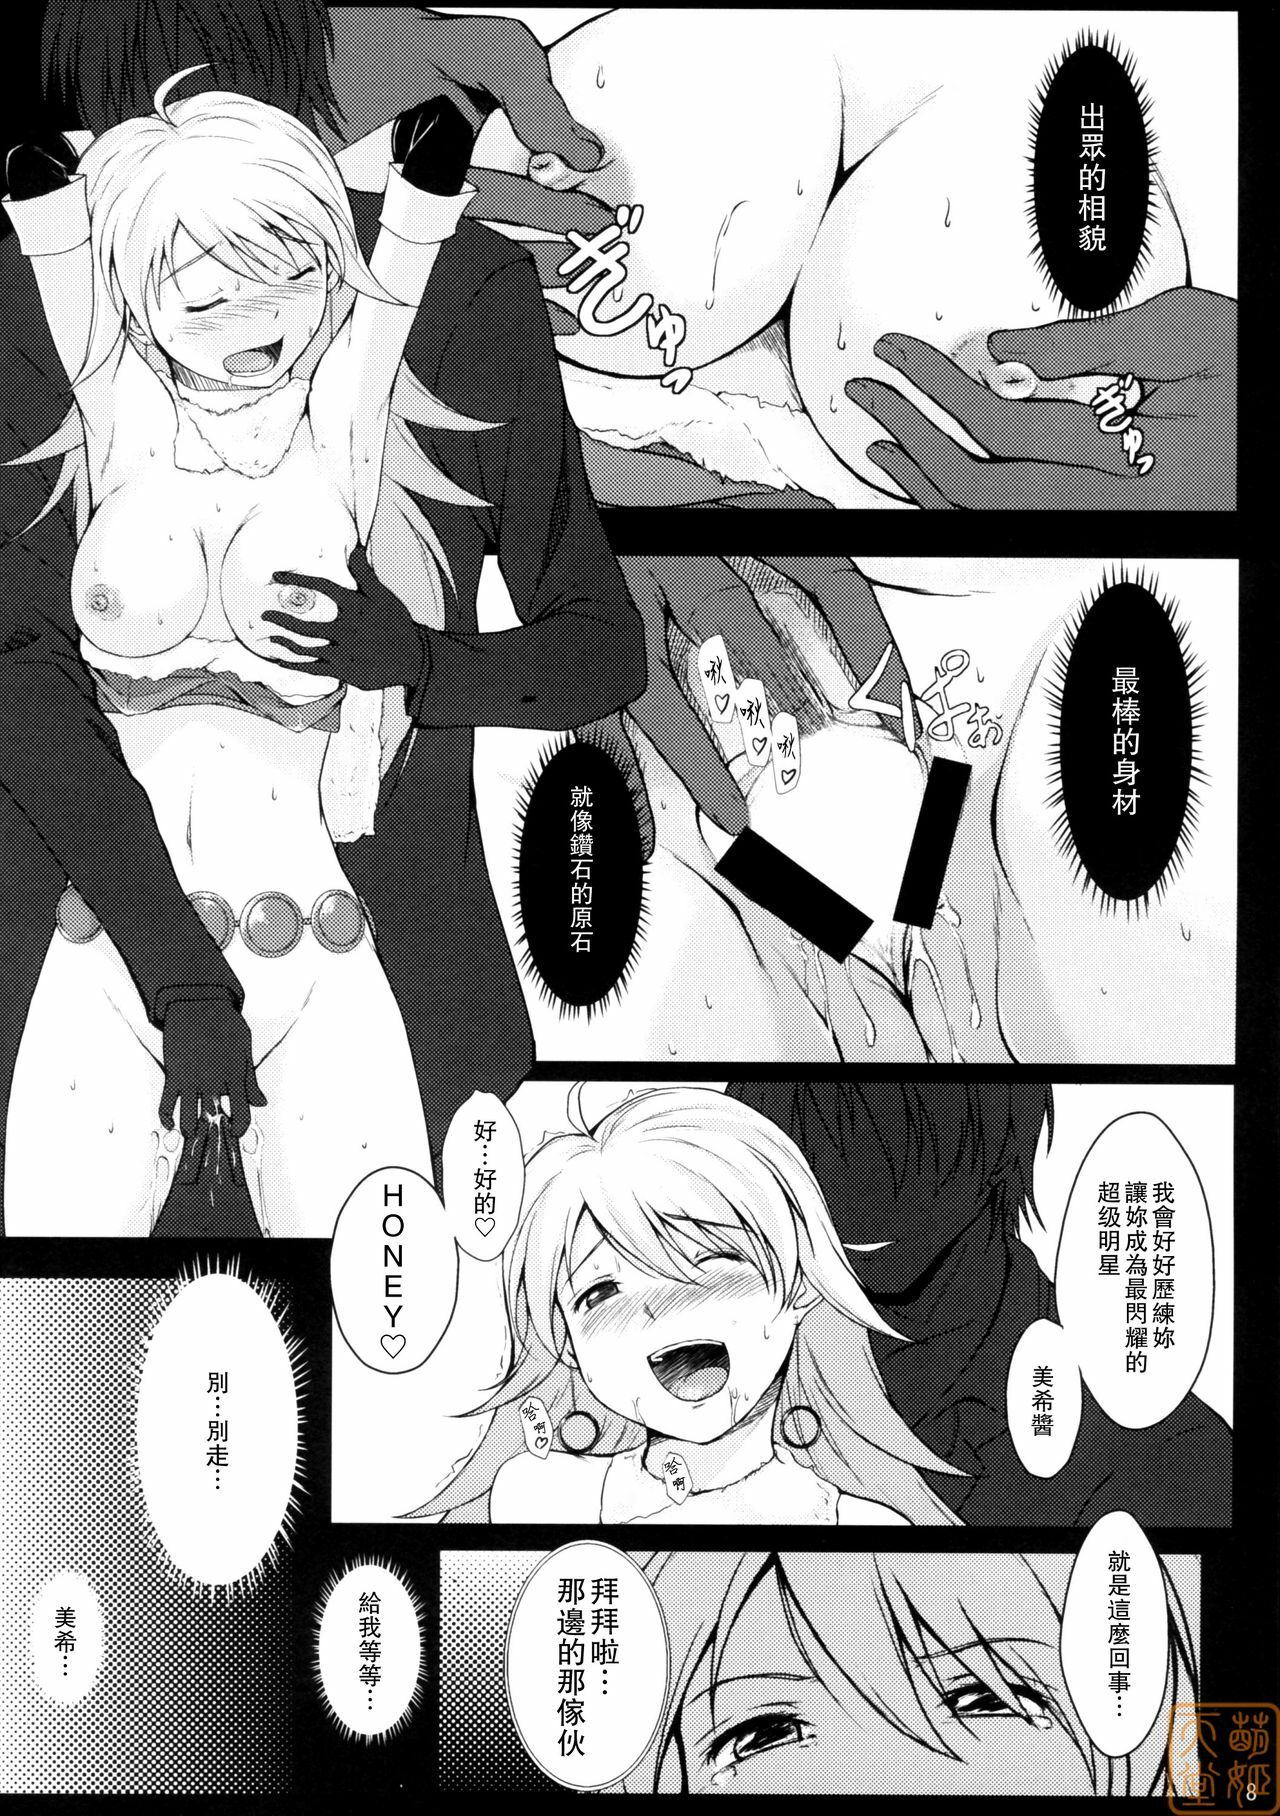 (C75) [Count2.4 (Nishi)] Love x 2 Shining Star (THE iDOLM@STER) [Chinese] [萌姬天堂] page 7 full